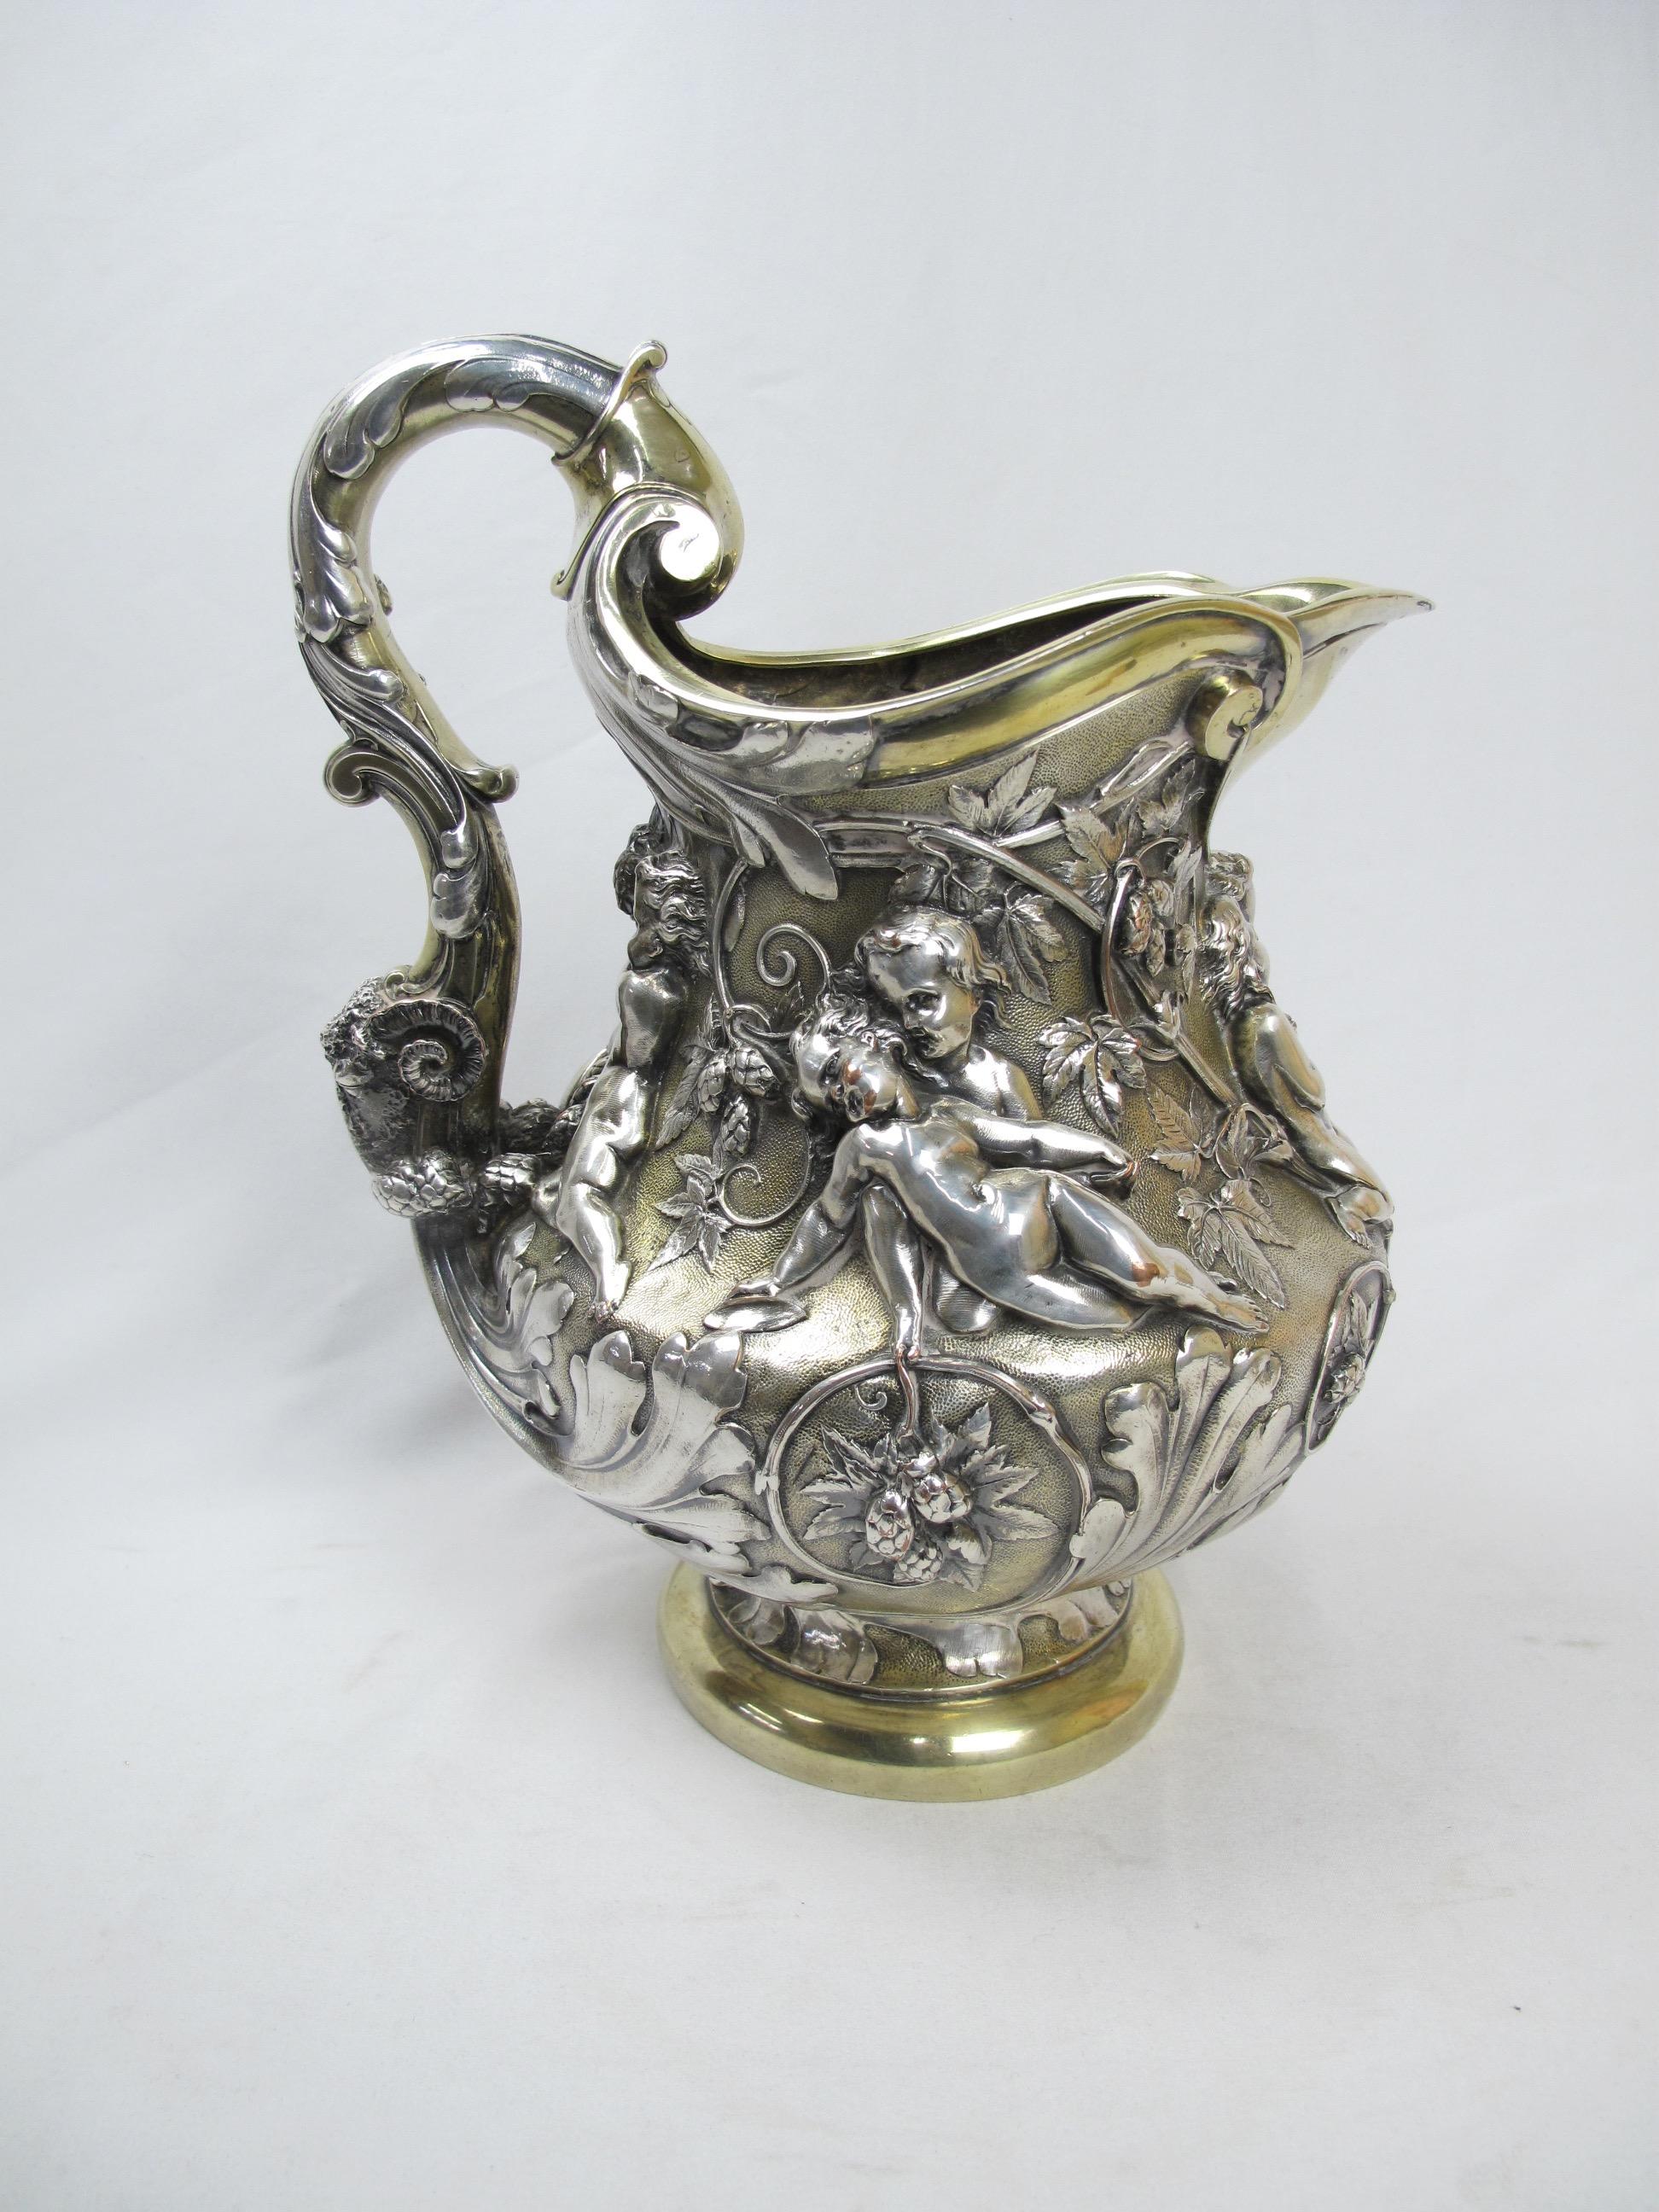 Rococo Revival Large Ornate Putti Cavorting Among Hops Repousse Pitcher Elkington 19th Century For Sale